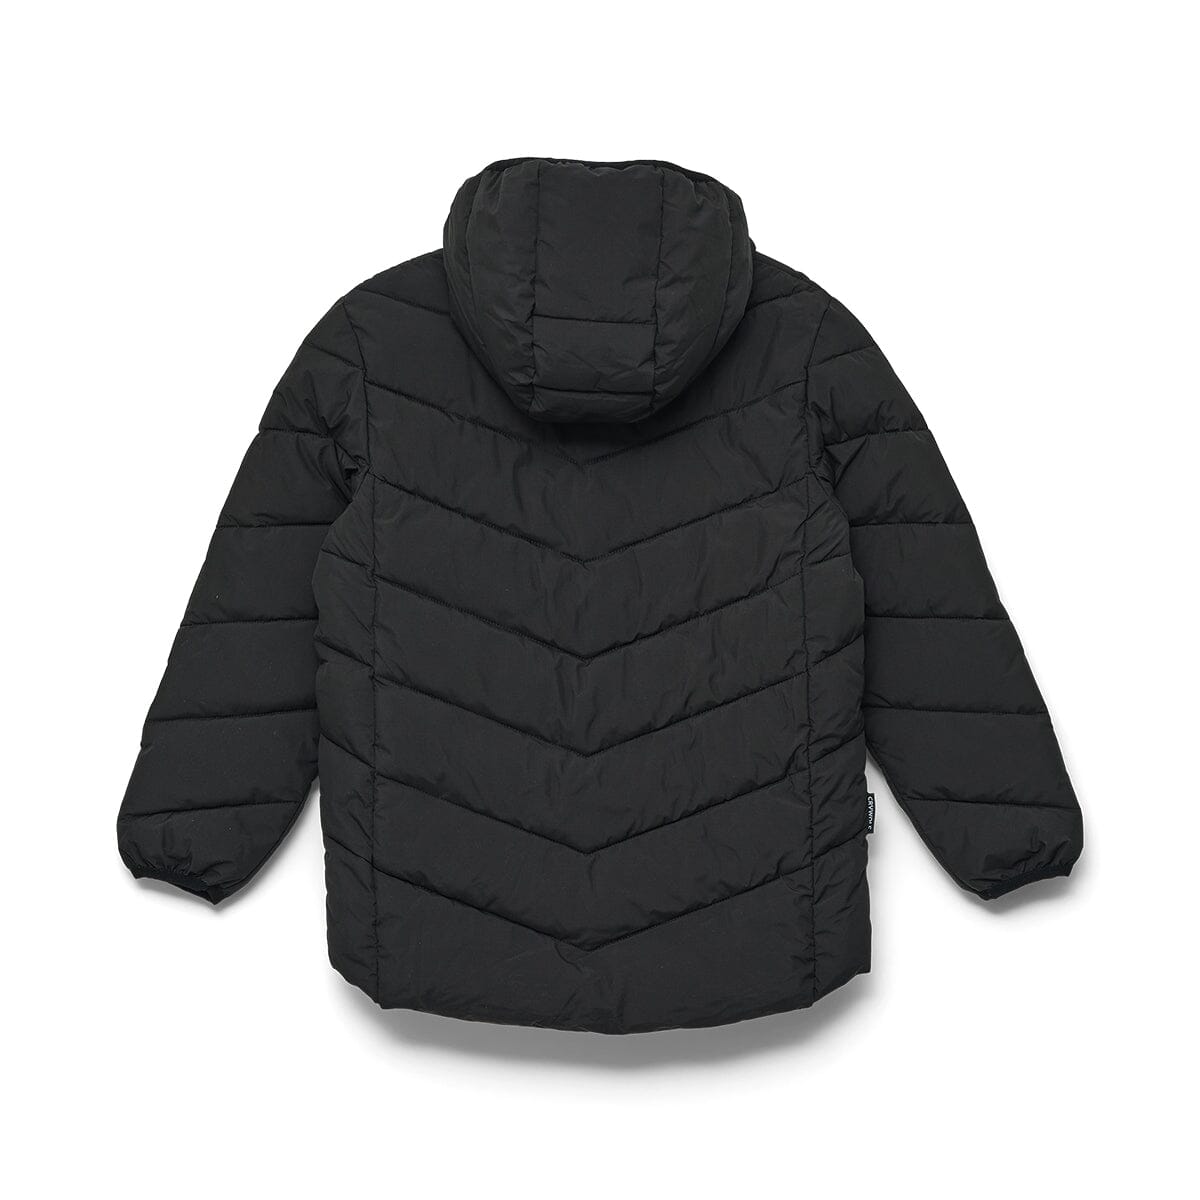 Crywolf | ECO PUFFER - Black *** PRE ORDER / DUE EARLY-MID APRIL *** Girls Crywolf